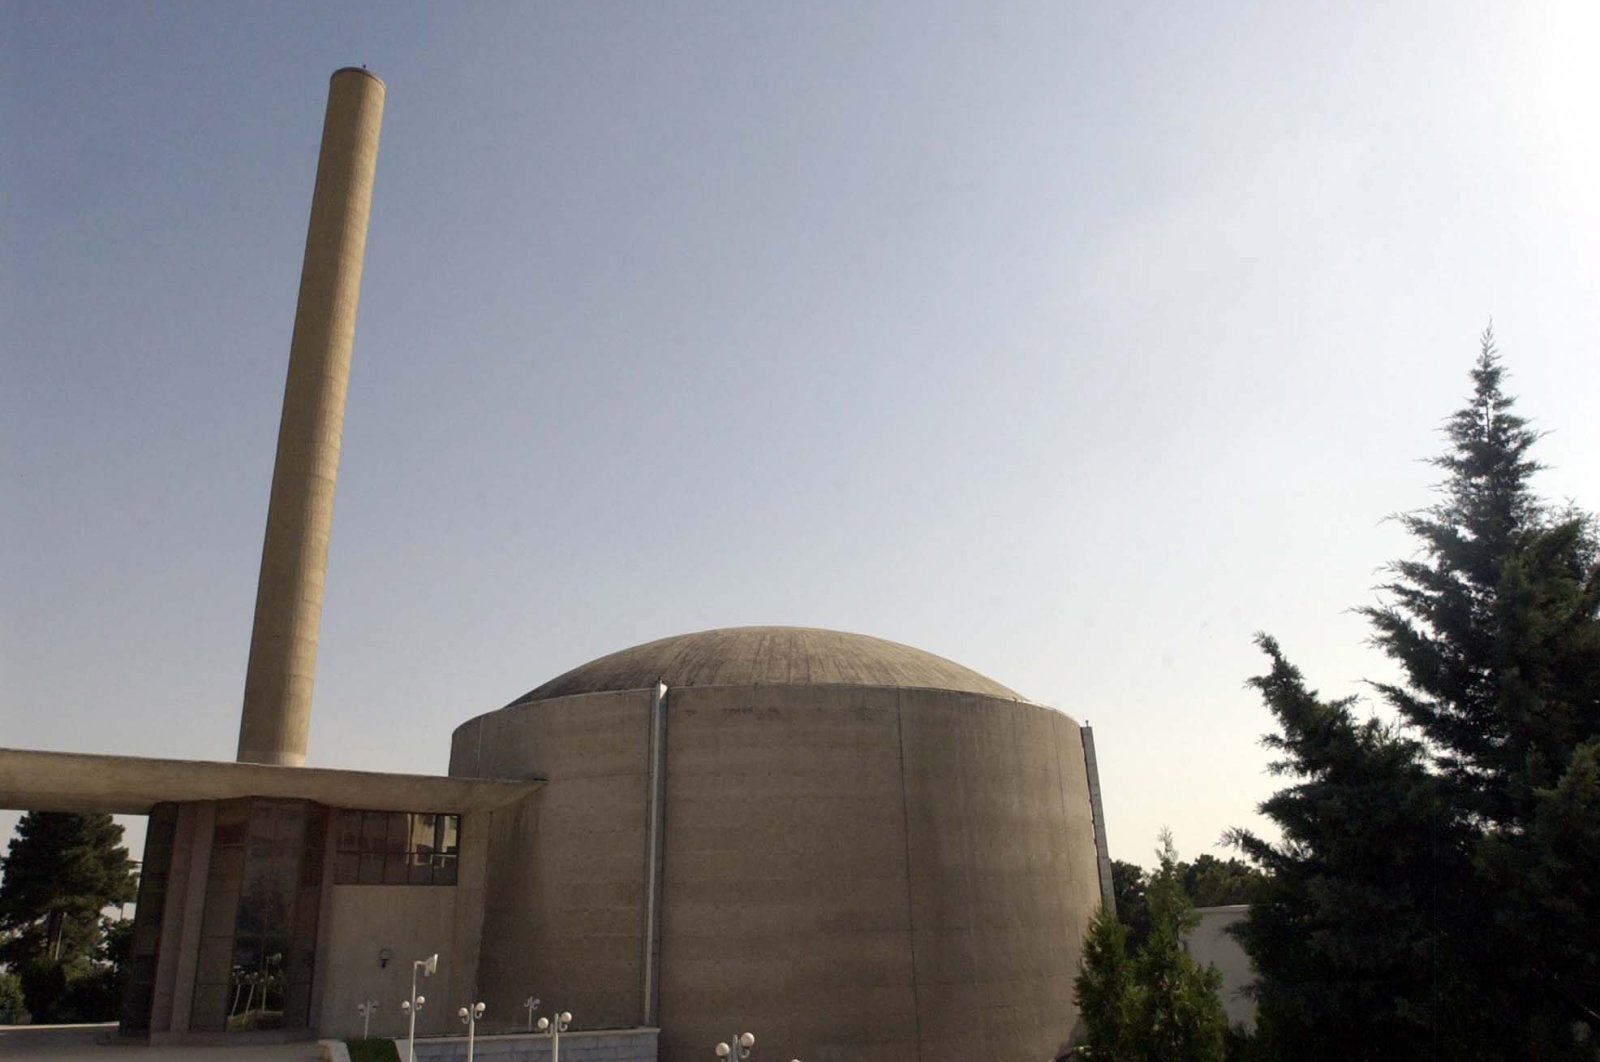 The building of Tehran's nuclear research reactor is seen at Iran's Atomic Energy Organization's headquarters, in Tehran, Iran, June 21, 2003. (AP Photo)